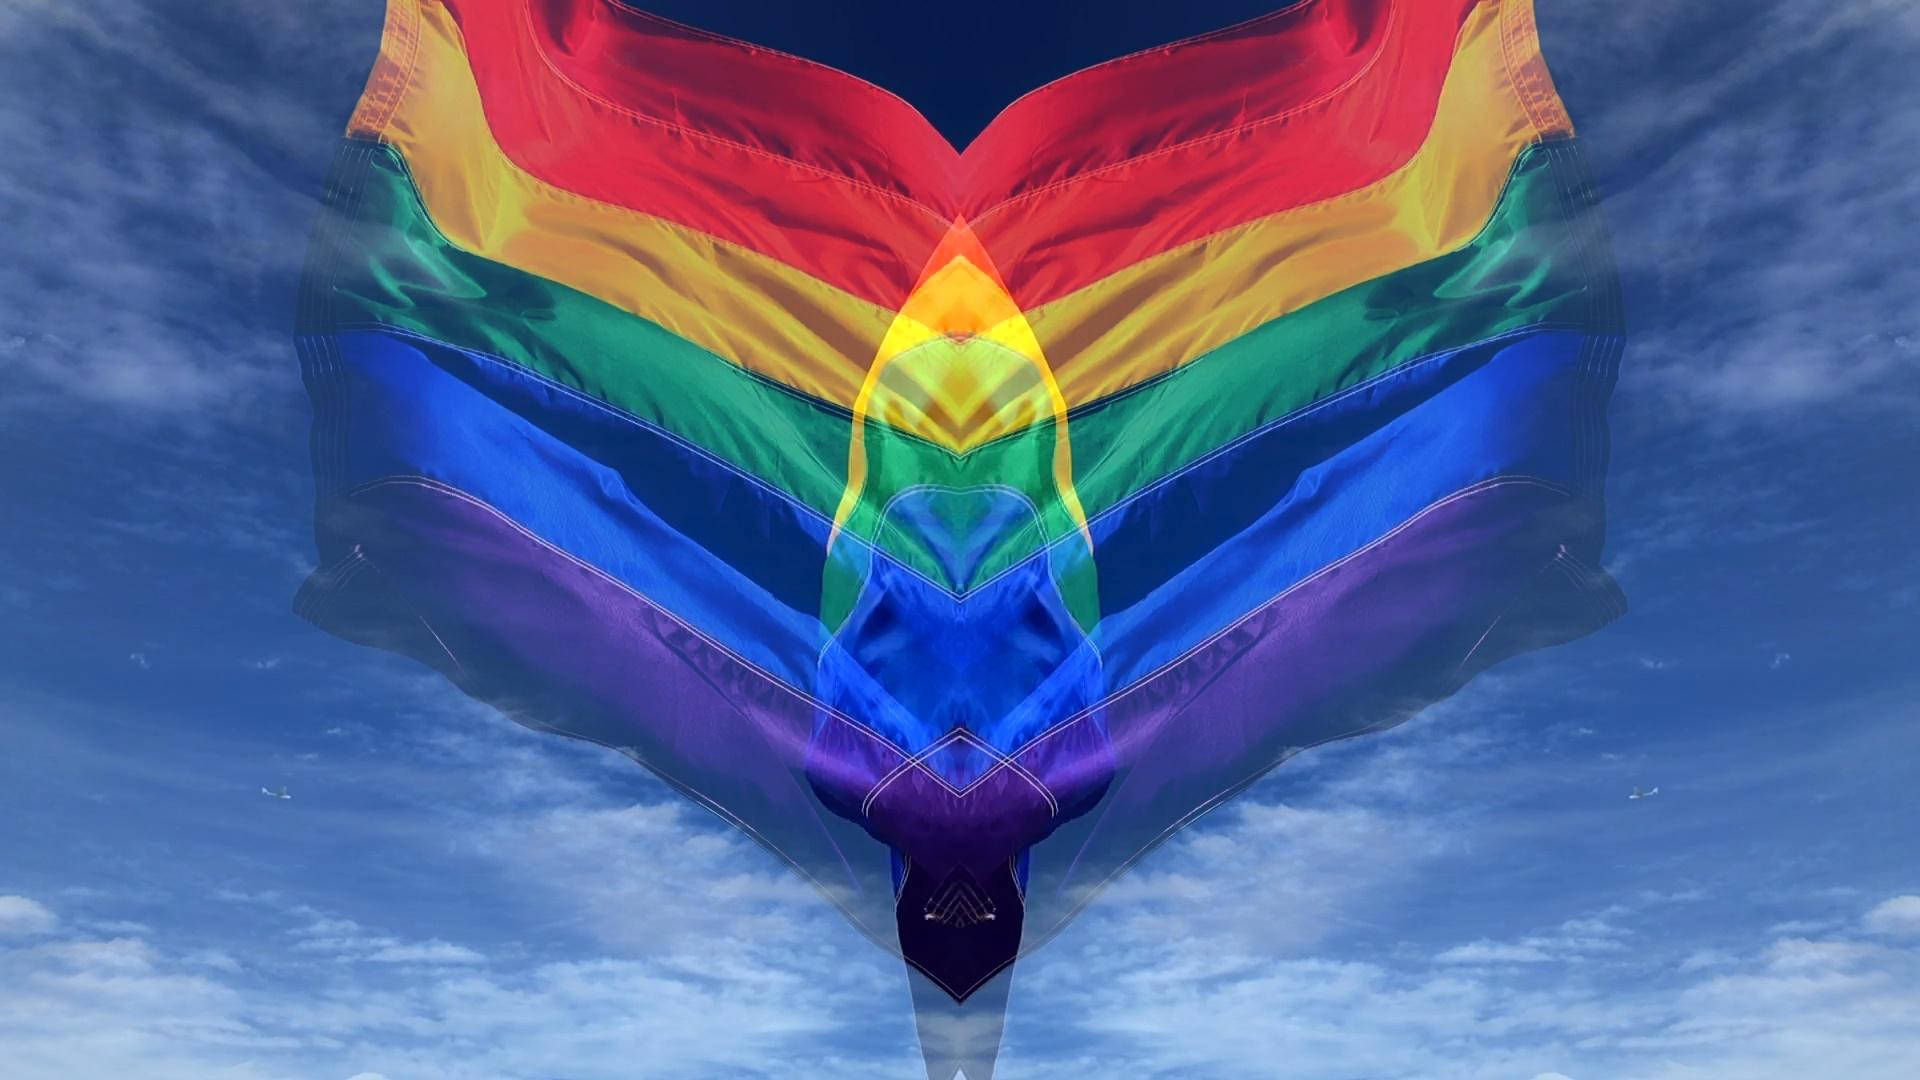 Captivating image of the Pride Flag in a Mirror Reflection Wallpaper